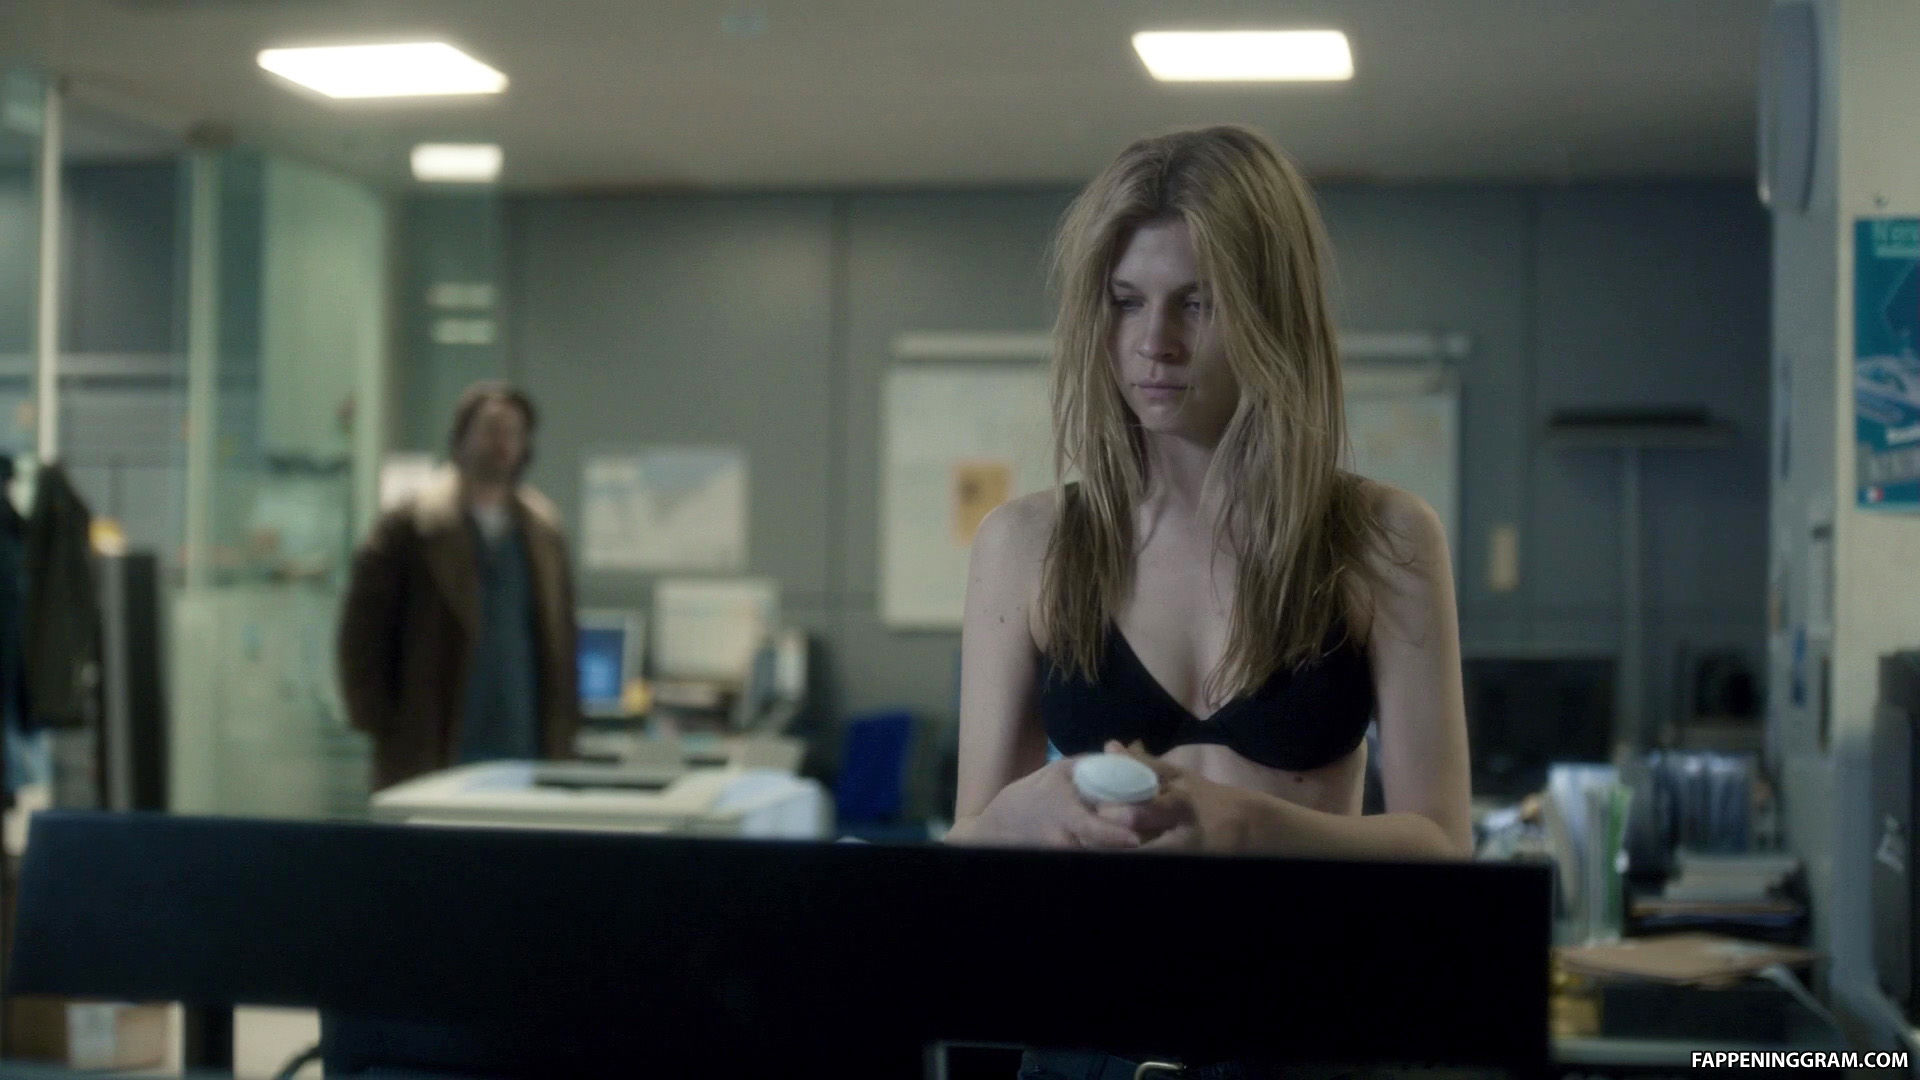 Clémence Poésy Nude The Fappening - FappeningGram